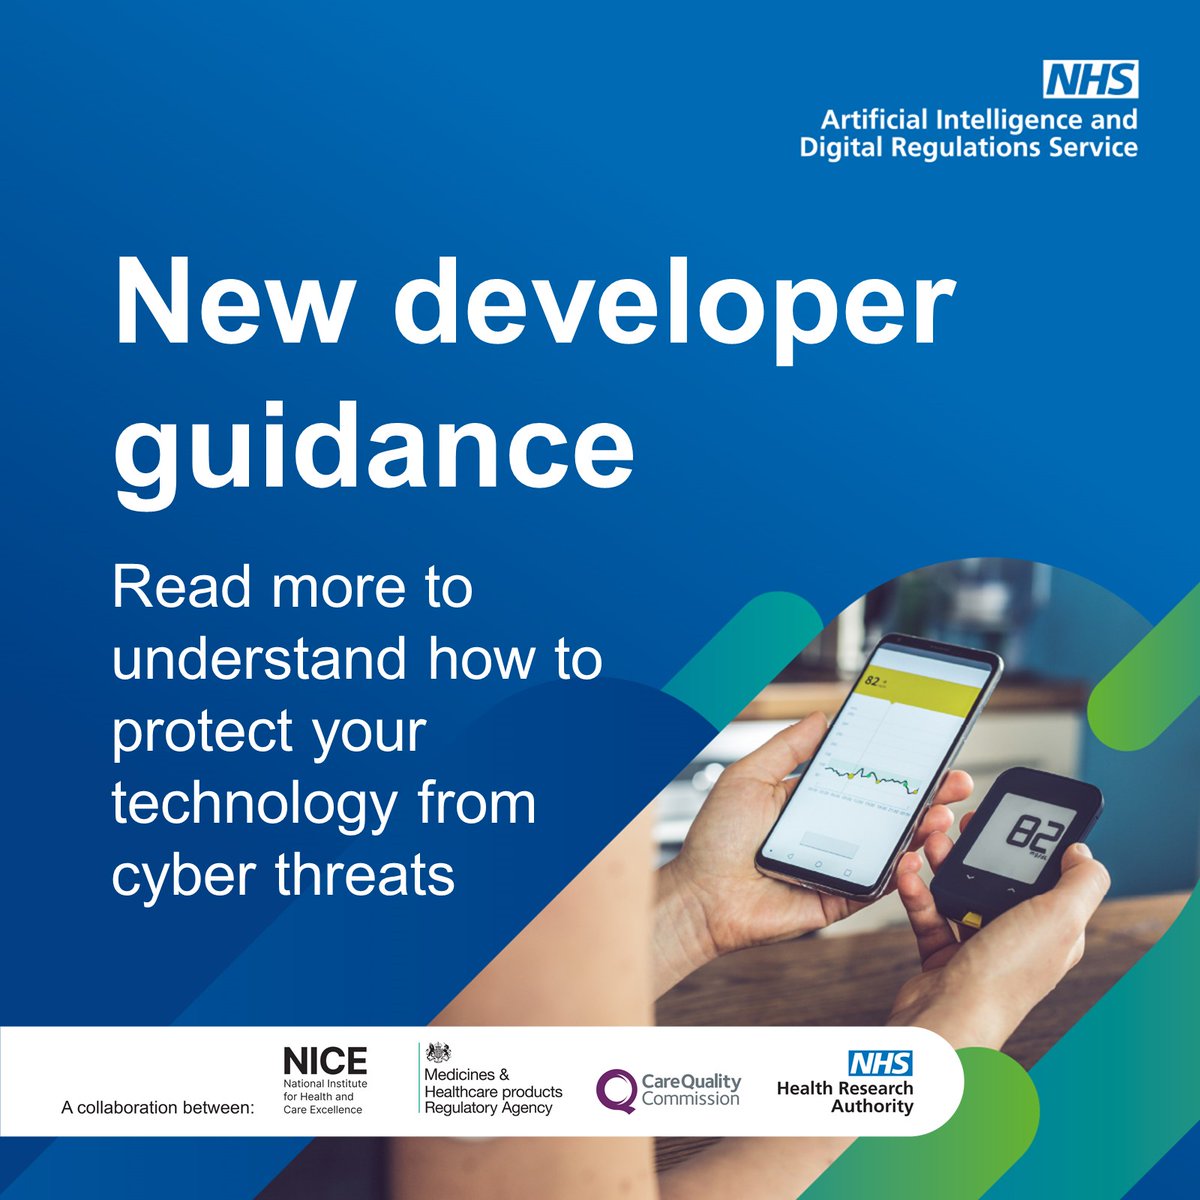 We've published new guidance for developers of digital health technologies. Understand how Network and Information Systems Regulations protect against cyber threats and build resilience for your digital healthcare technology⬇️ digitalregulations.innovation.nhs.uk/regulations-an…